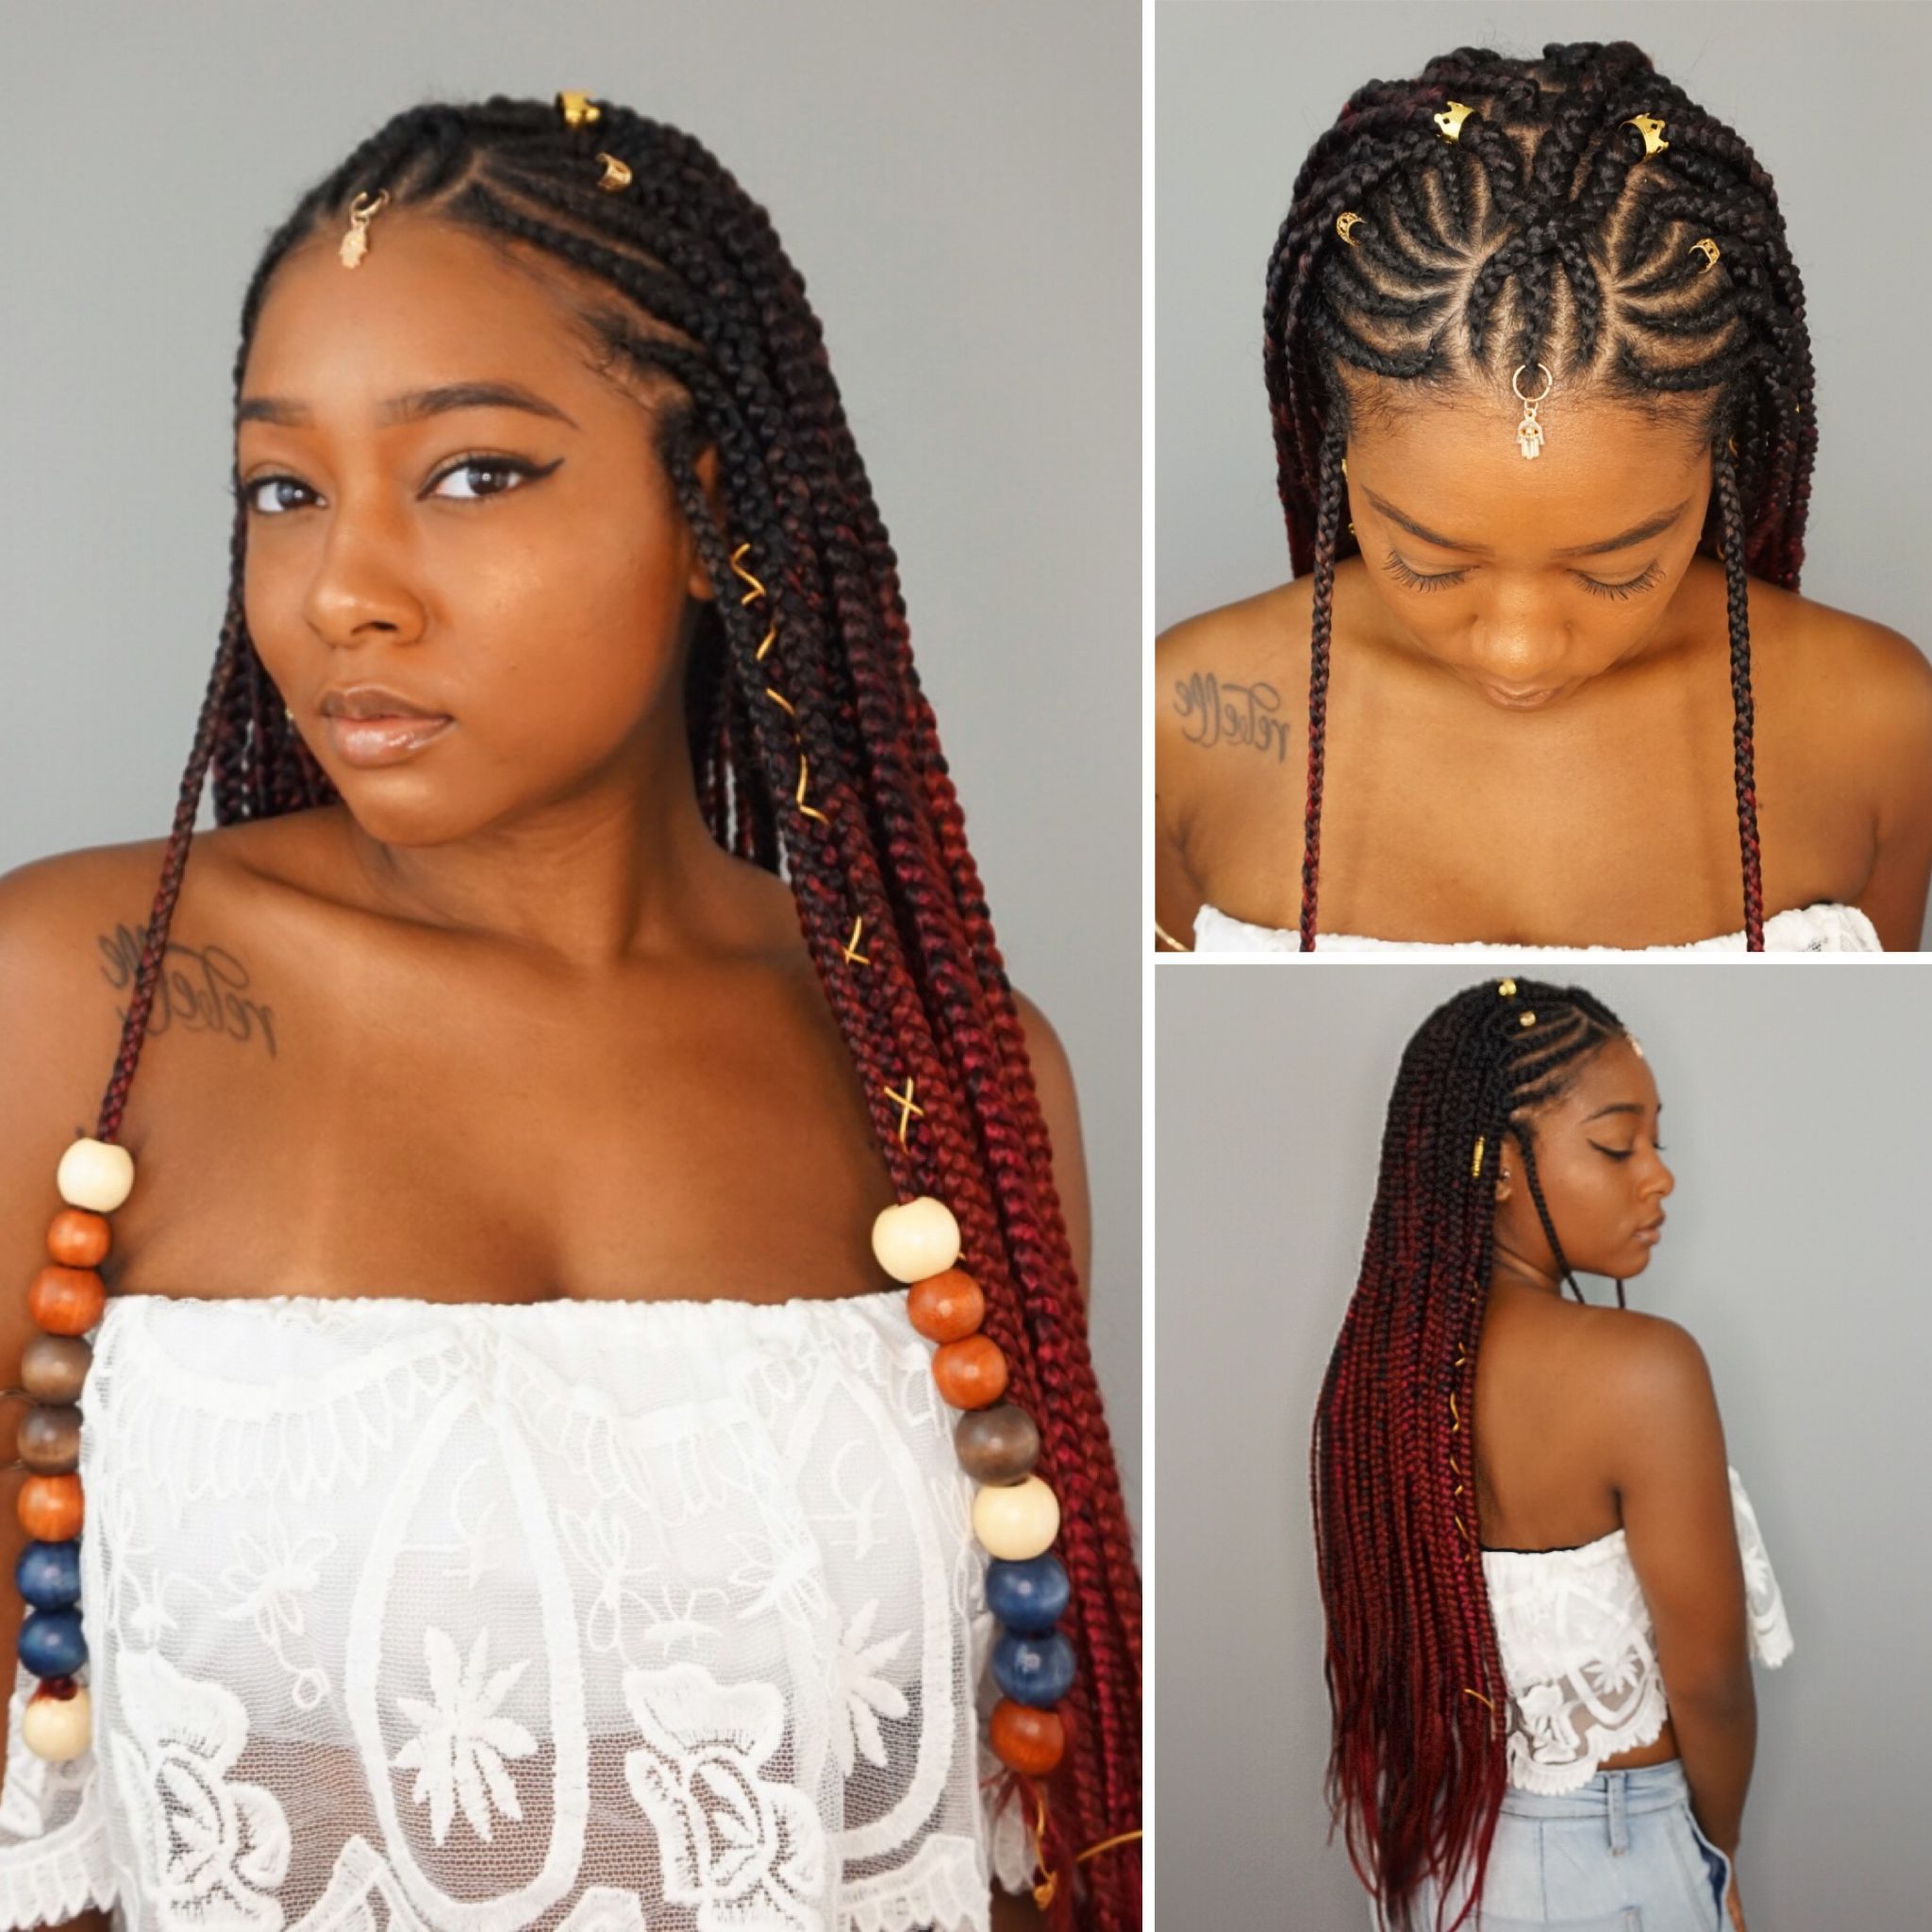 Hot Tribal Braids Hairstyles To Summer 2018 Hair Style Braids Intended For 2019 Braided Crown Hairstyles With Bright Beads (View 14 of 20)